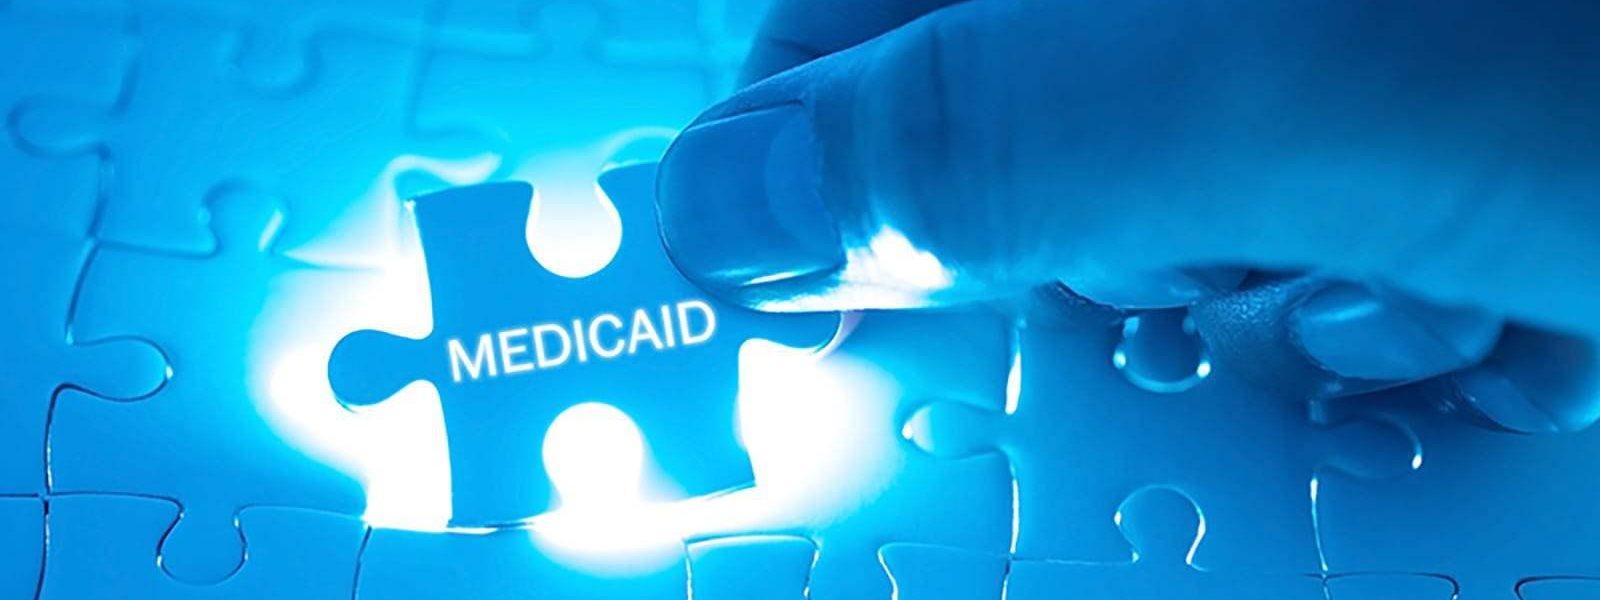 Image of a hand putting down a puzzle piece reading "Medicaid."